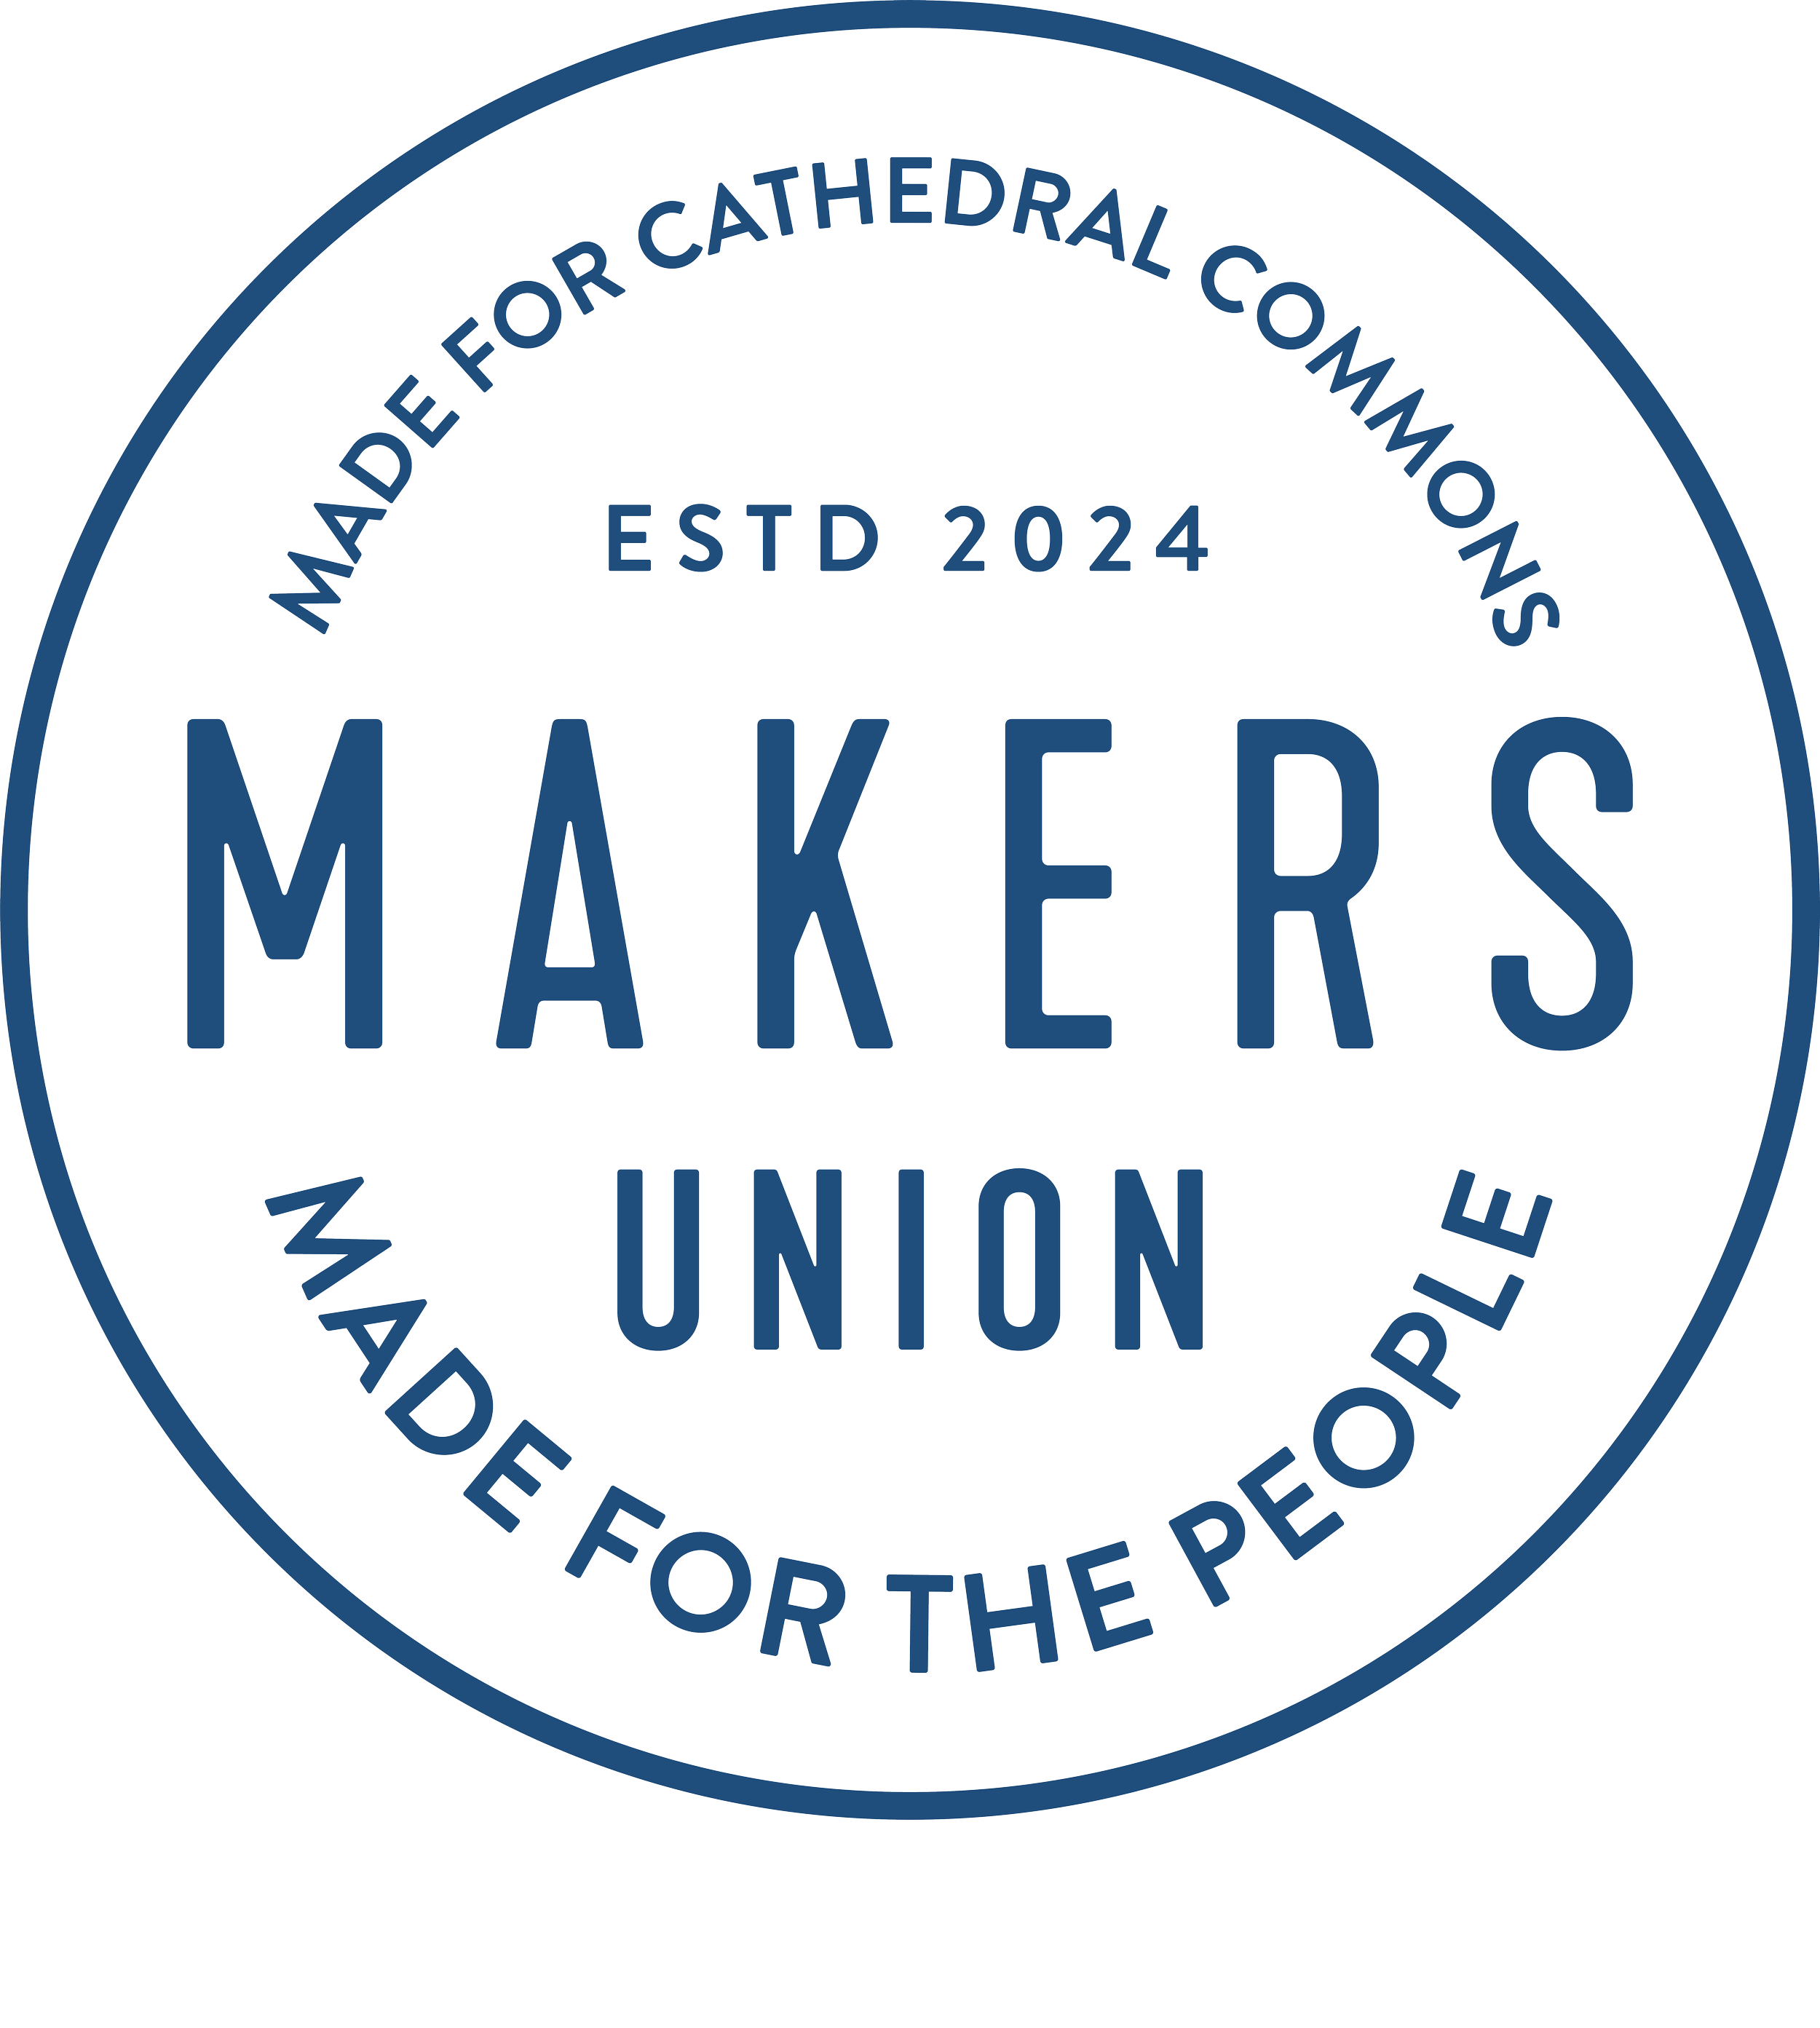 RESERVATIONS — Makers Union